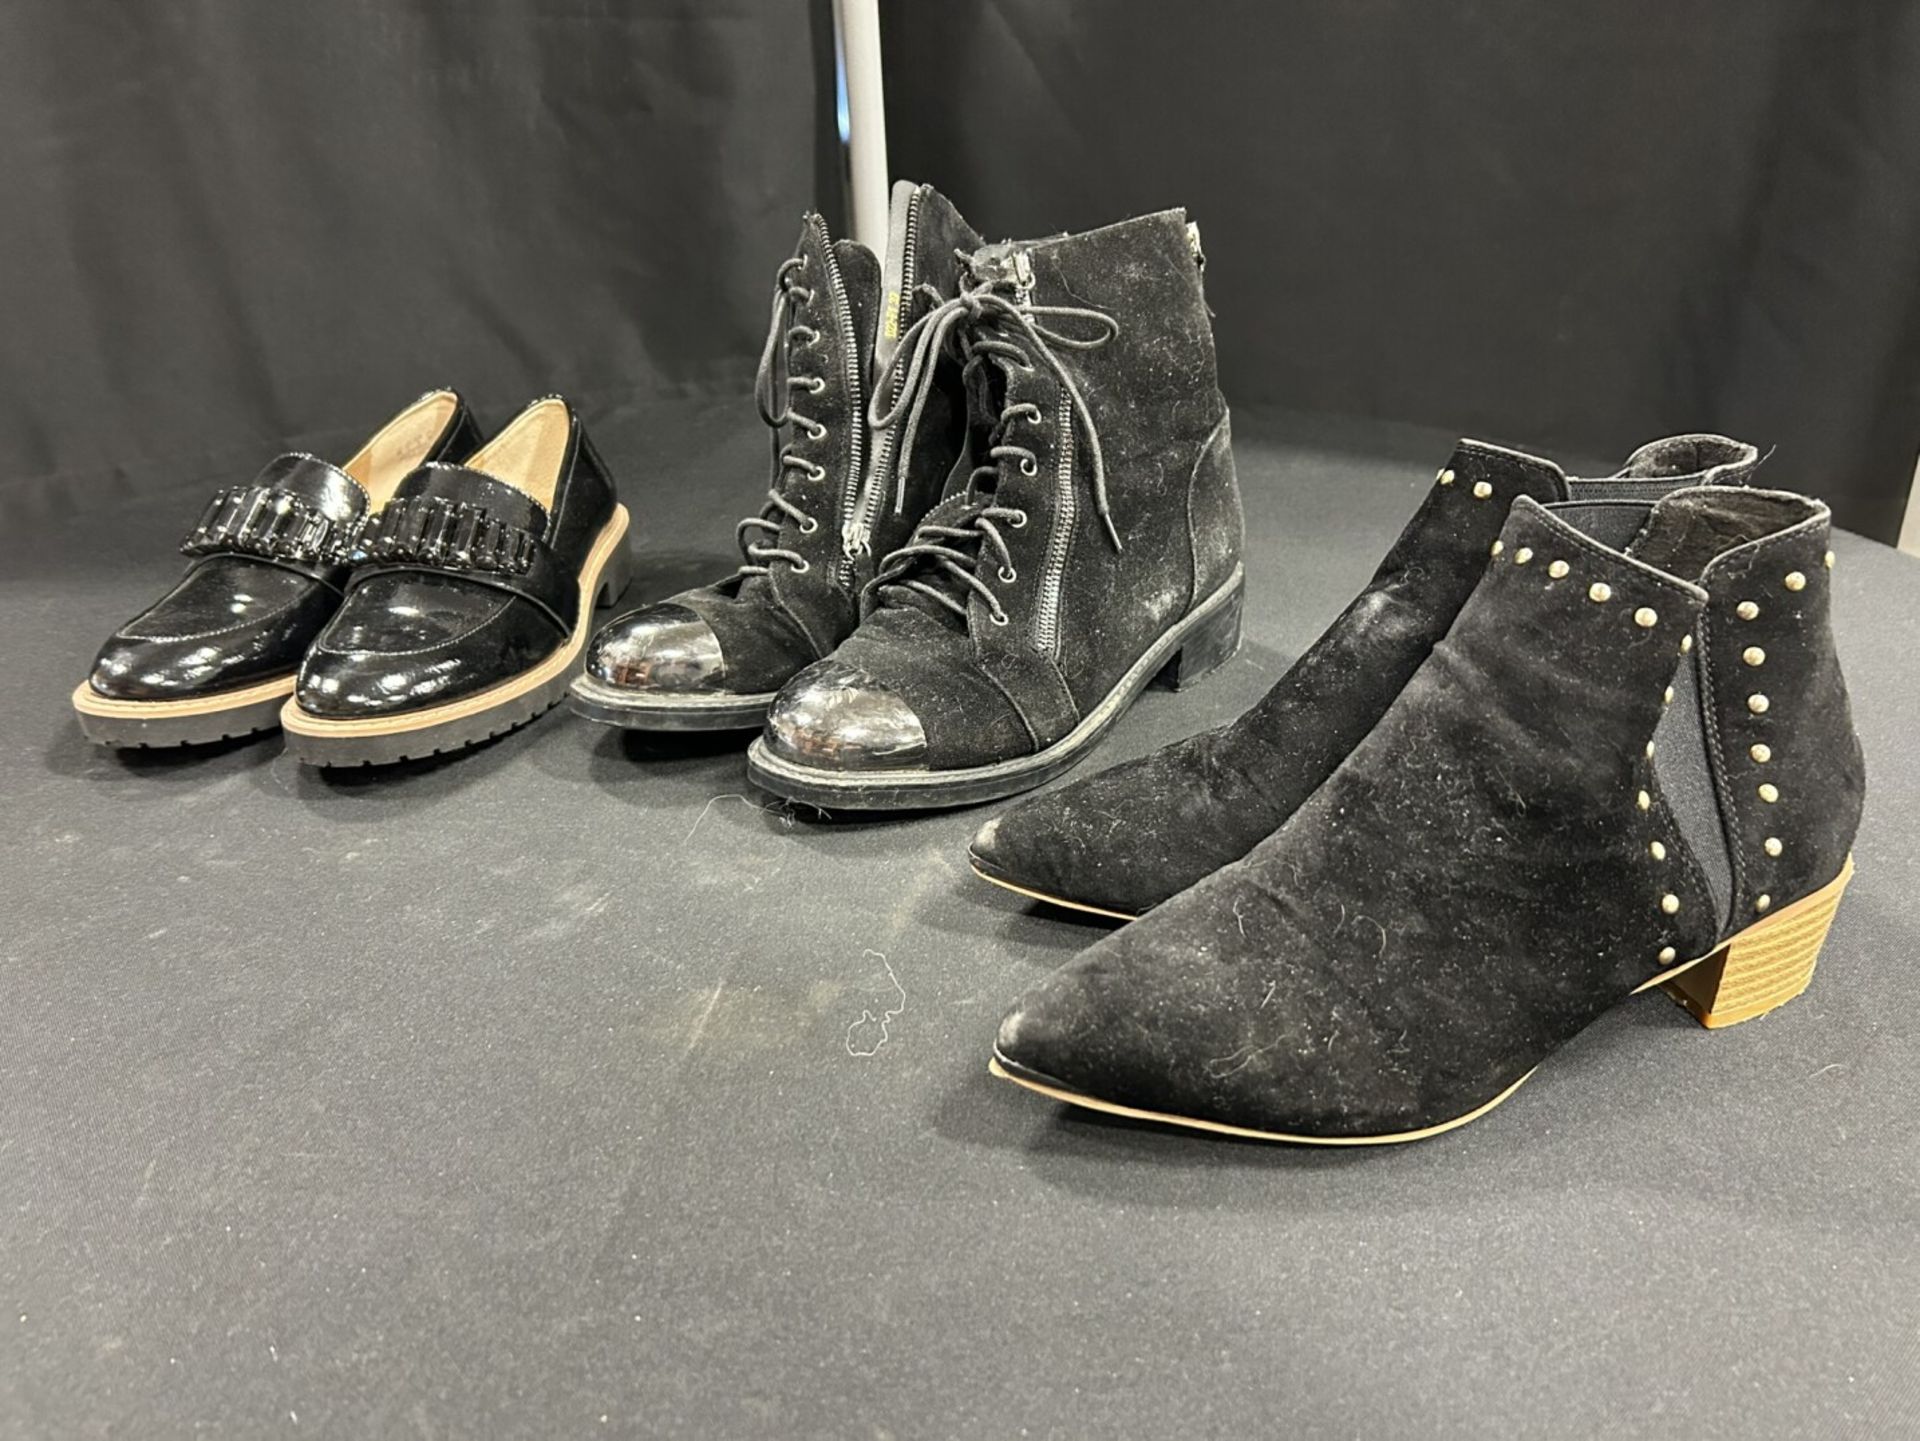 WOMEN'S HIGH HEEL SHOES, BOOTS, & SHOES - Image 2 of 6